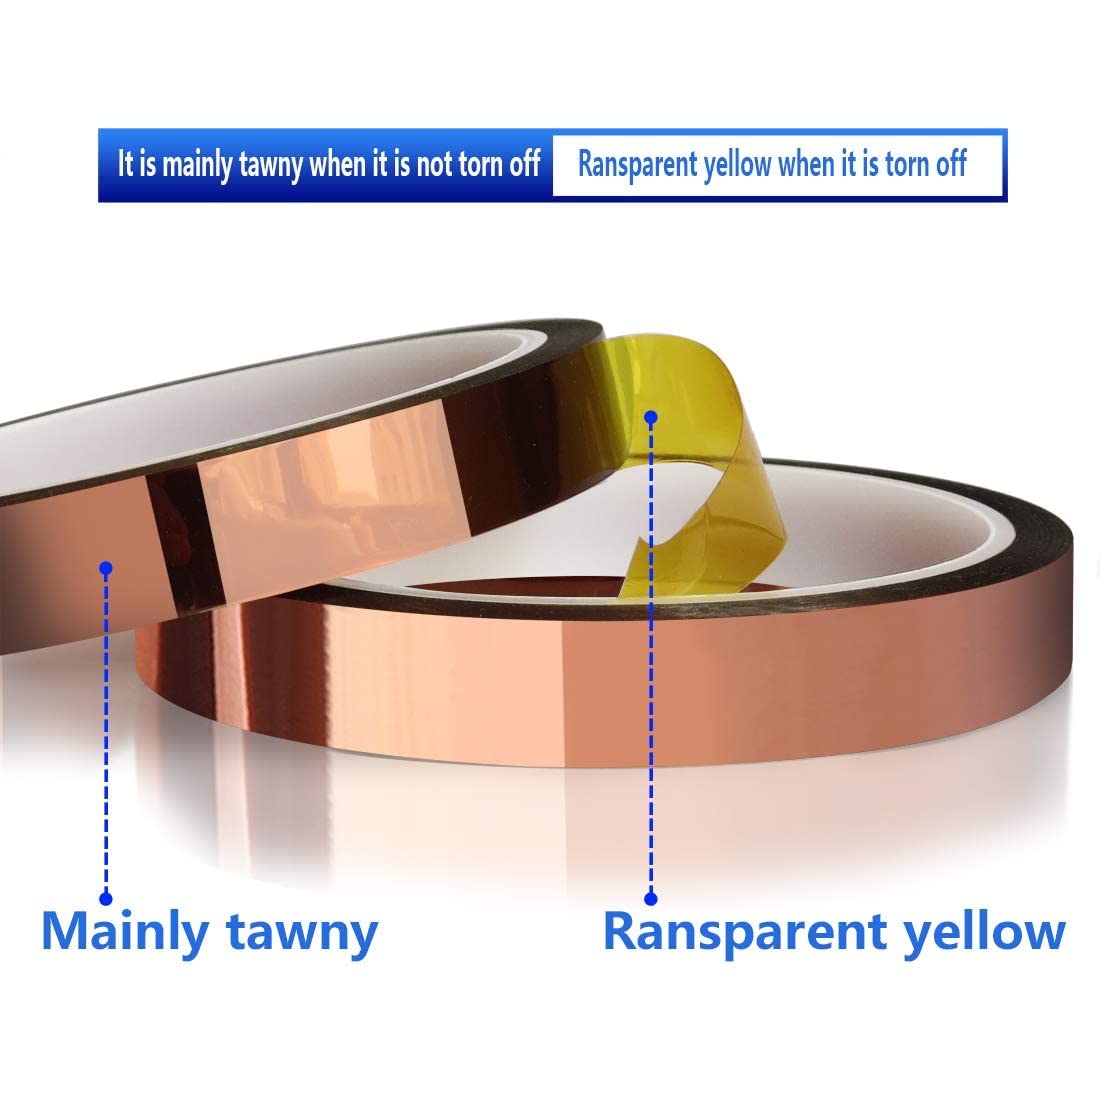 SCHOFIC Polyamide Heat Resistant High Temperature Kapton Tape/Thermal Tape/Sublimation Tape - W = 20 MM, L = 33 Meters